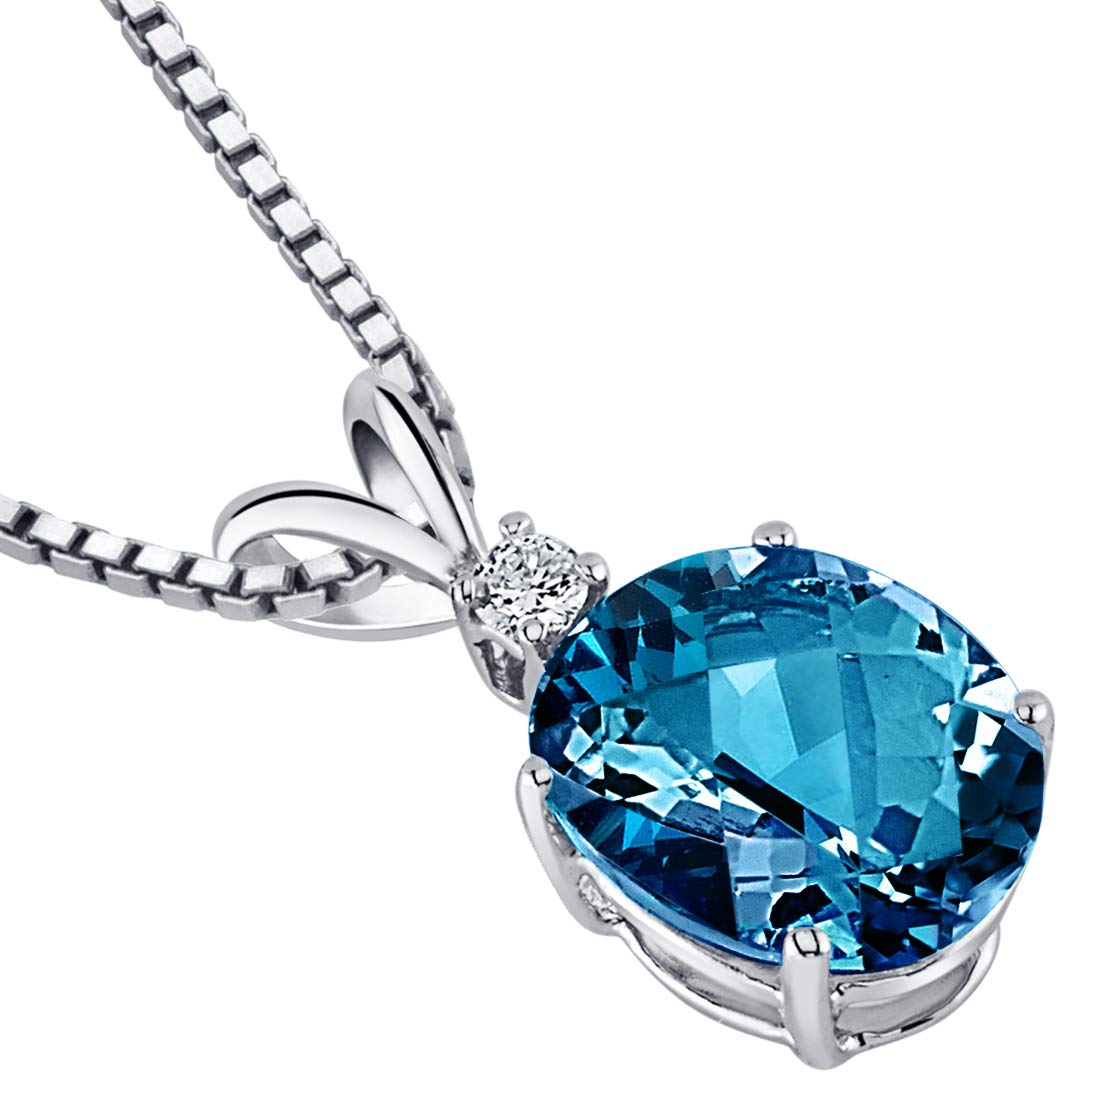 Peora London Blue Topaz with Diamond Solitaire Pendant for Women 14K White Gold, Genuine Gemstone Birthstone, 3 Carats Oval Shape 10x8mm